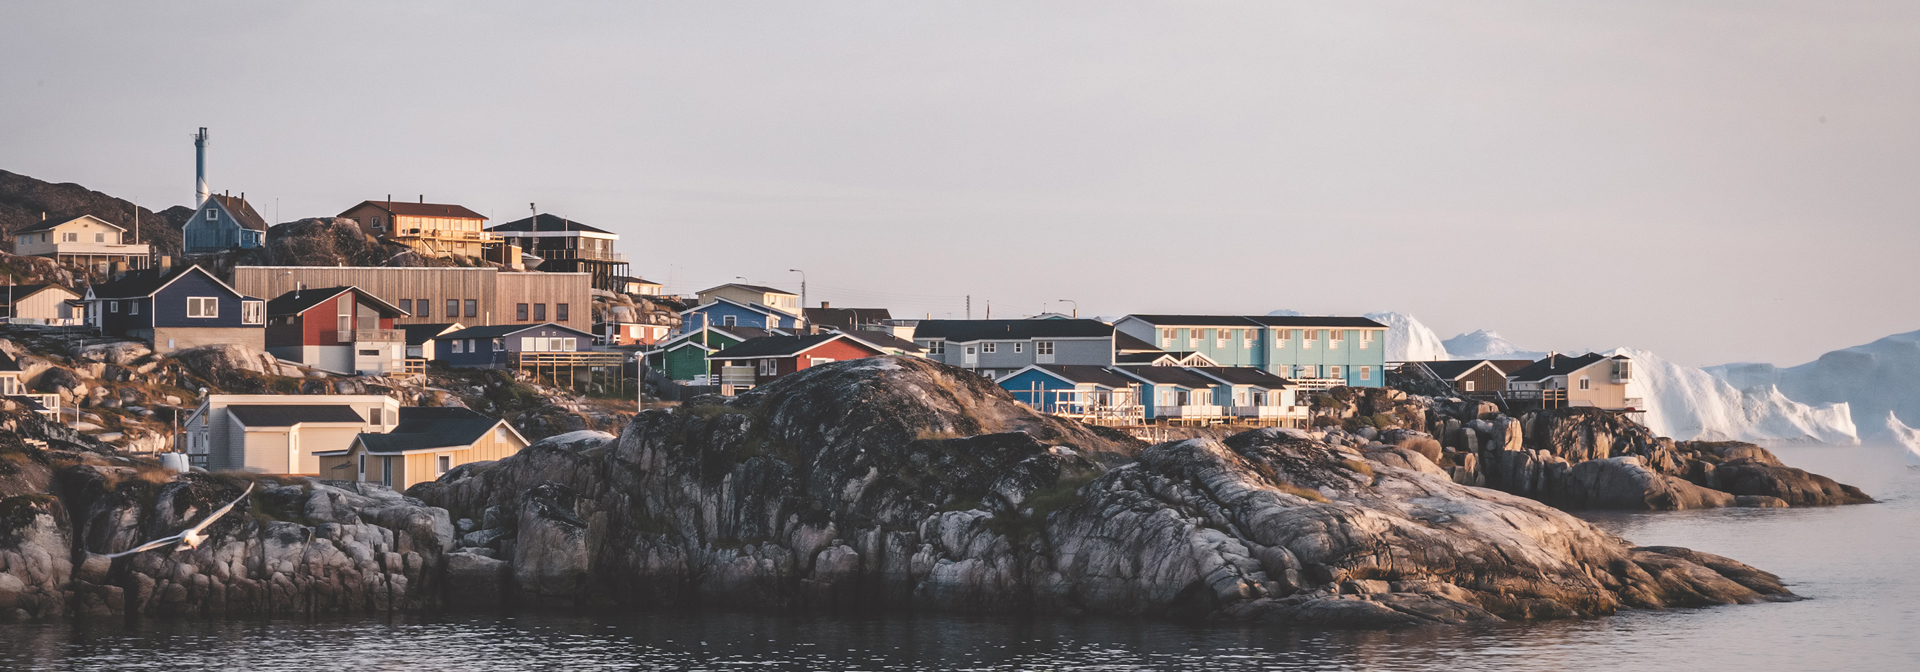 Ilulissat_by_sommer_03